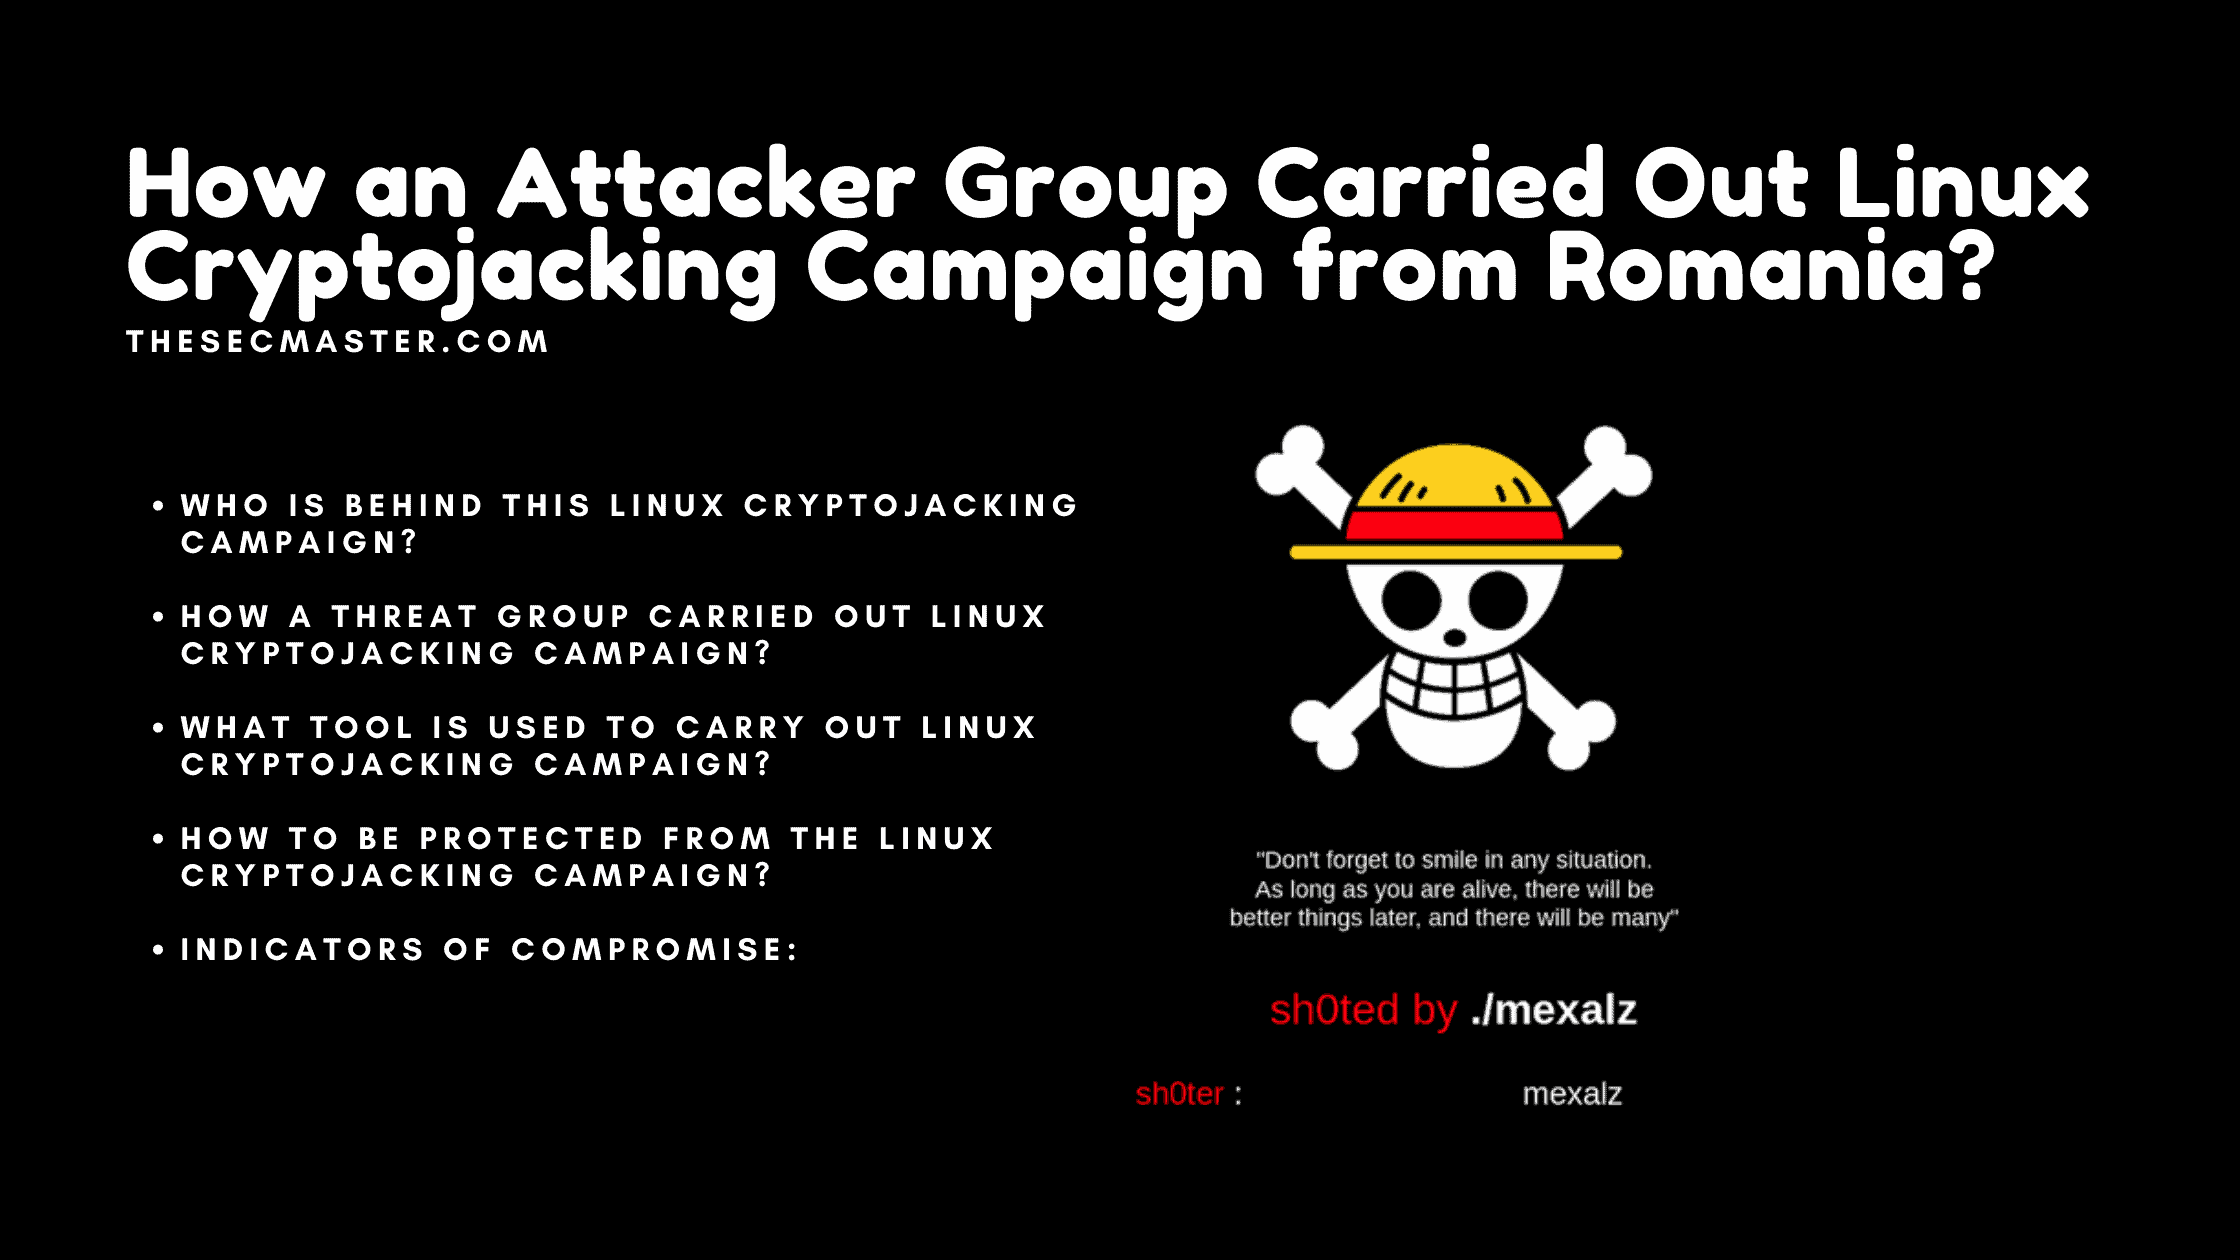 How A Threat Group Carried Out Linux Cryptojacking Campaign From Romania